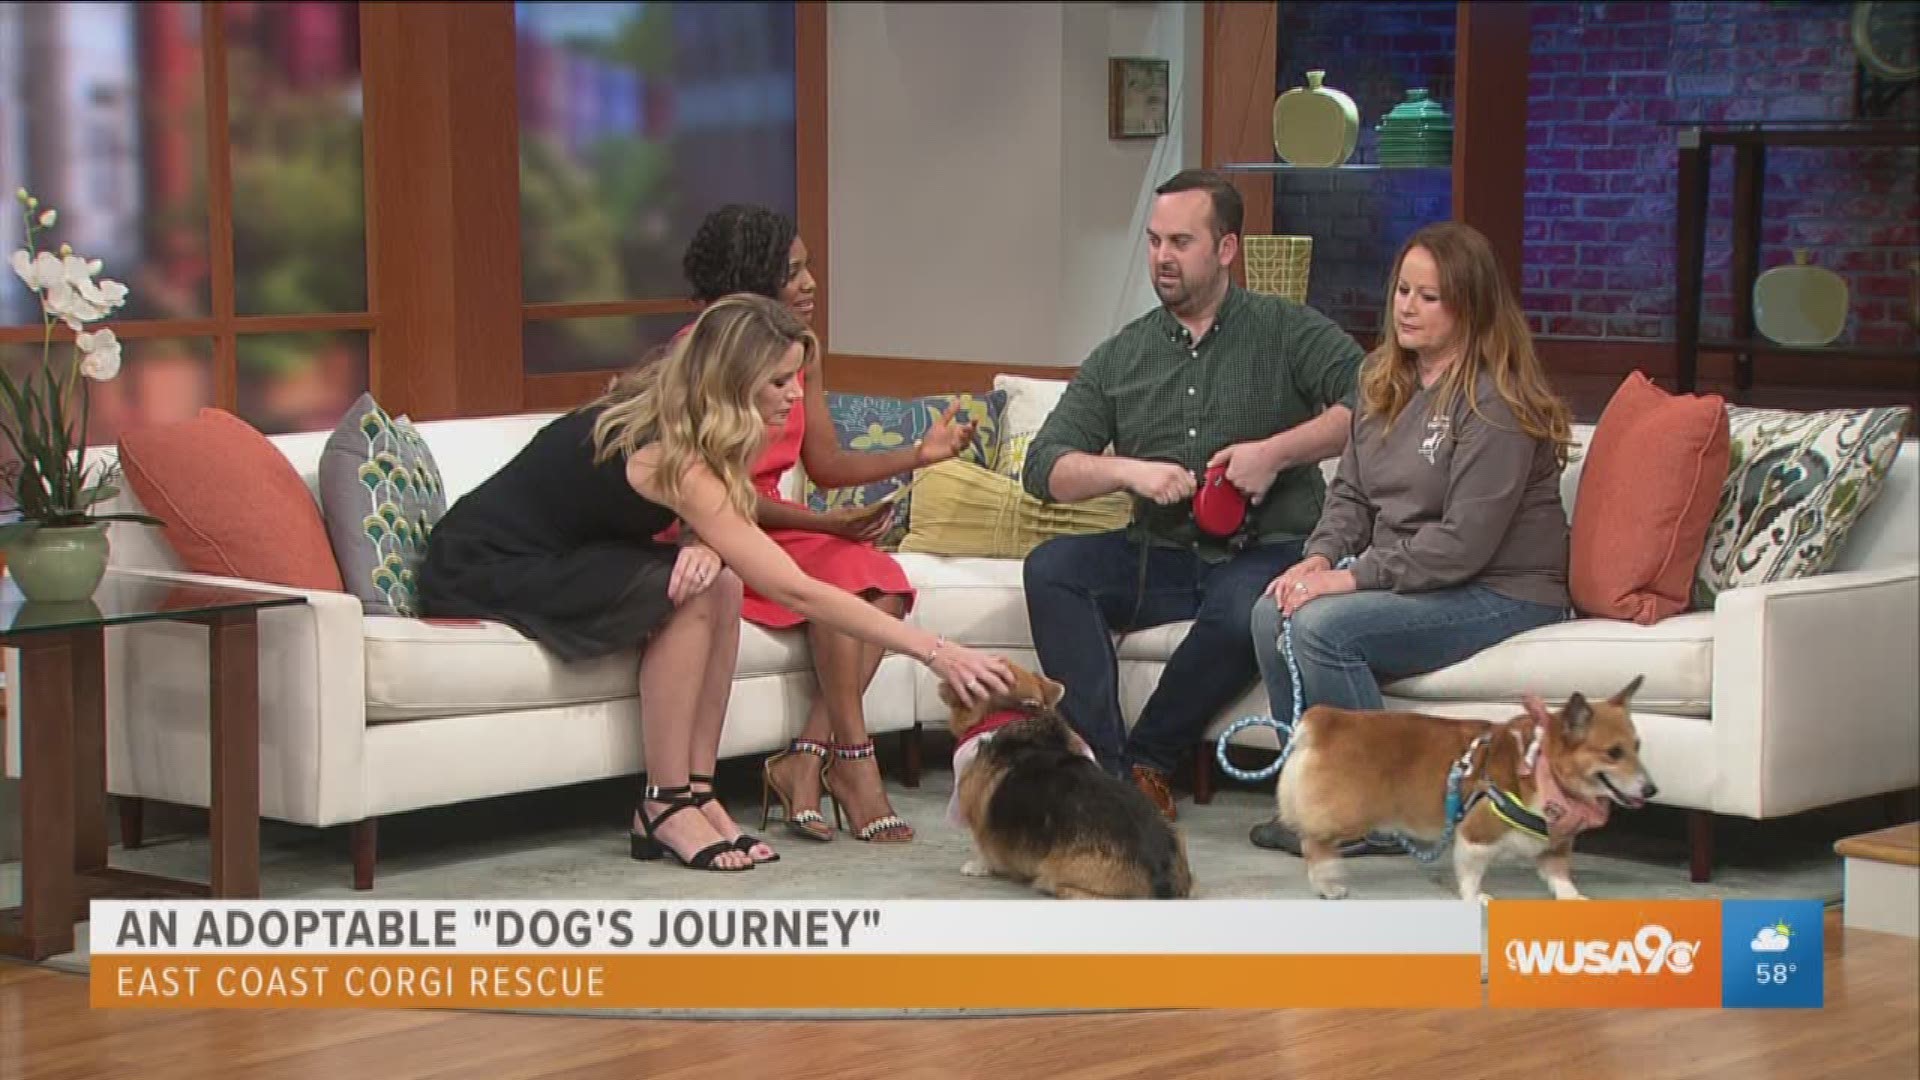 Members of the East Coast Corgi Rescue explain how they rescue adoptable dogs and how you can adopt a corgi yourself. Some friendships transcend lifetimes. “A Dog’s Journey,” the sequel to the heartwarming global hit “A Dog’s Purpose,” is in theaters this Friday!